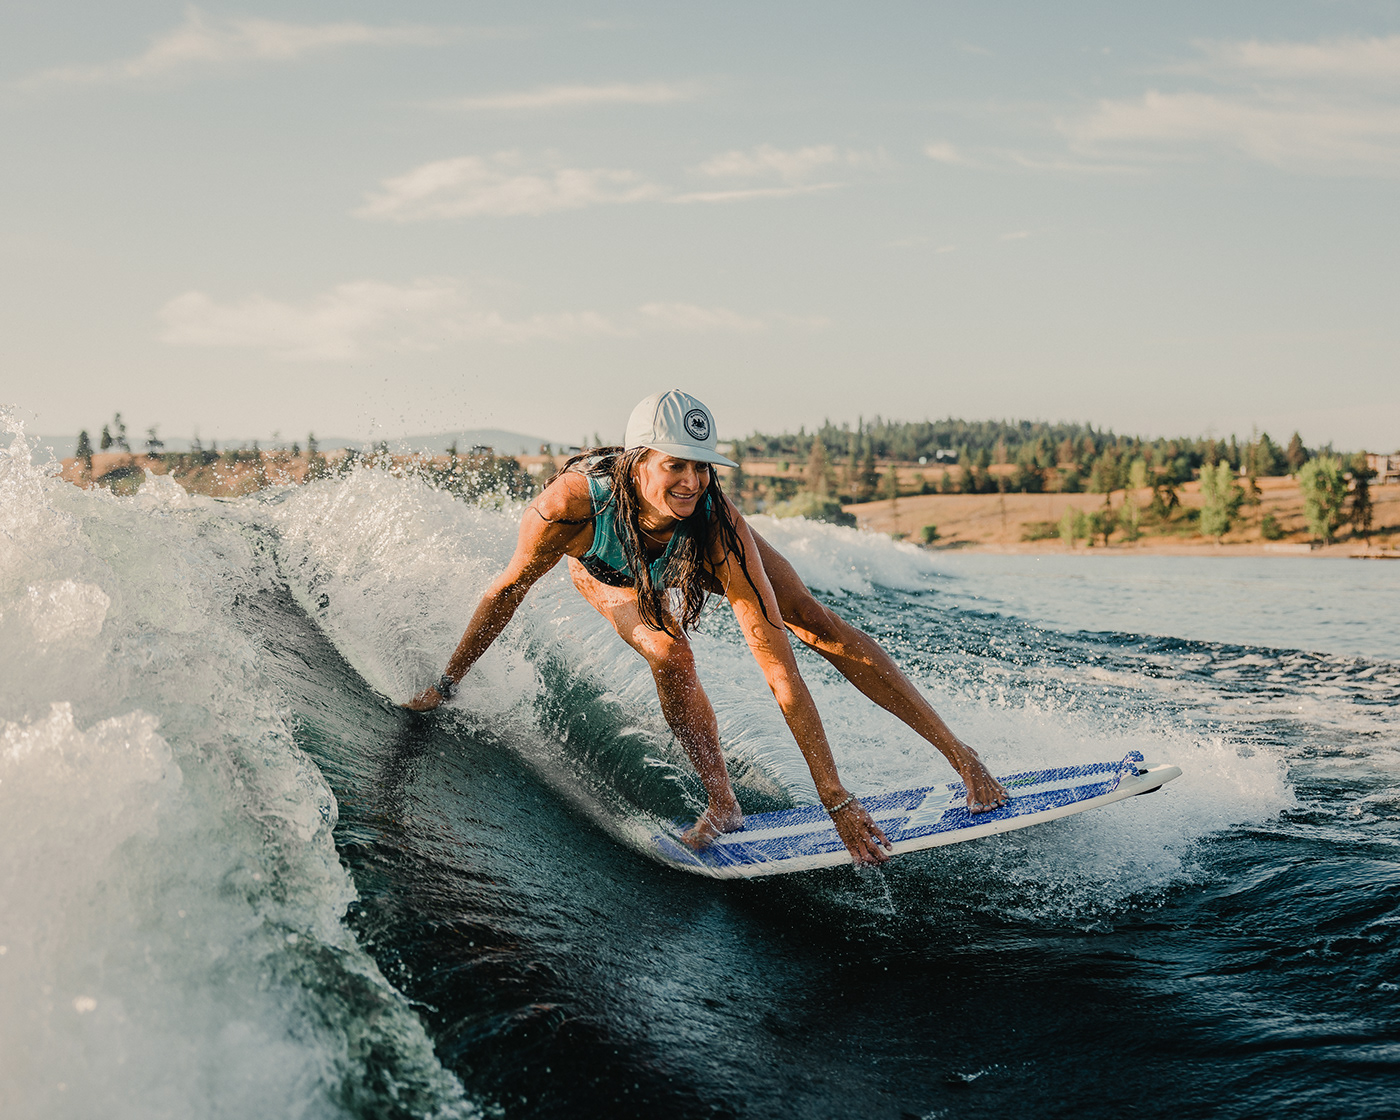 action photography action sports boat summer Surf surfing Wakesurf Water Sports